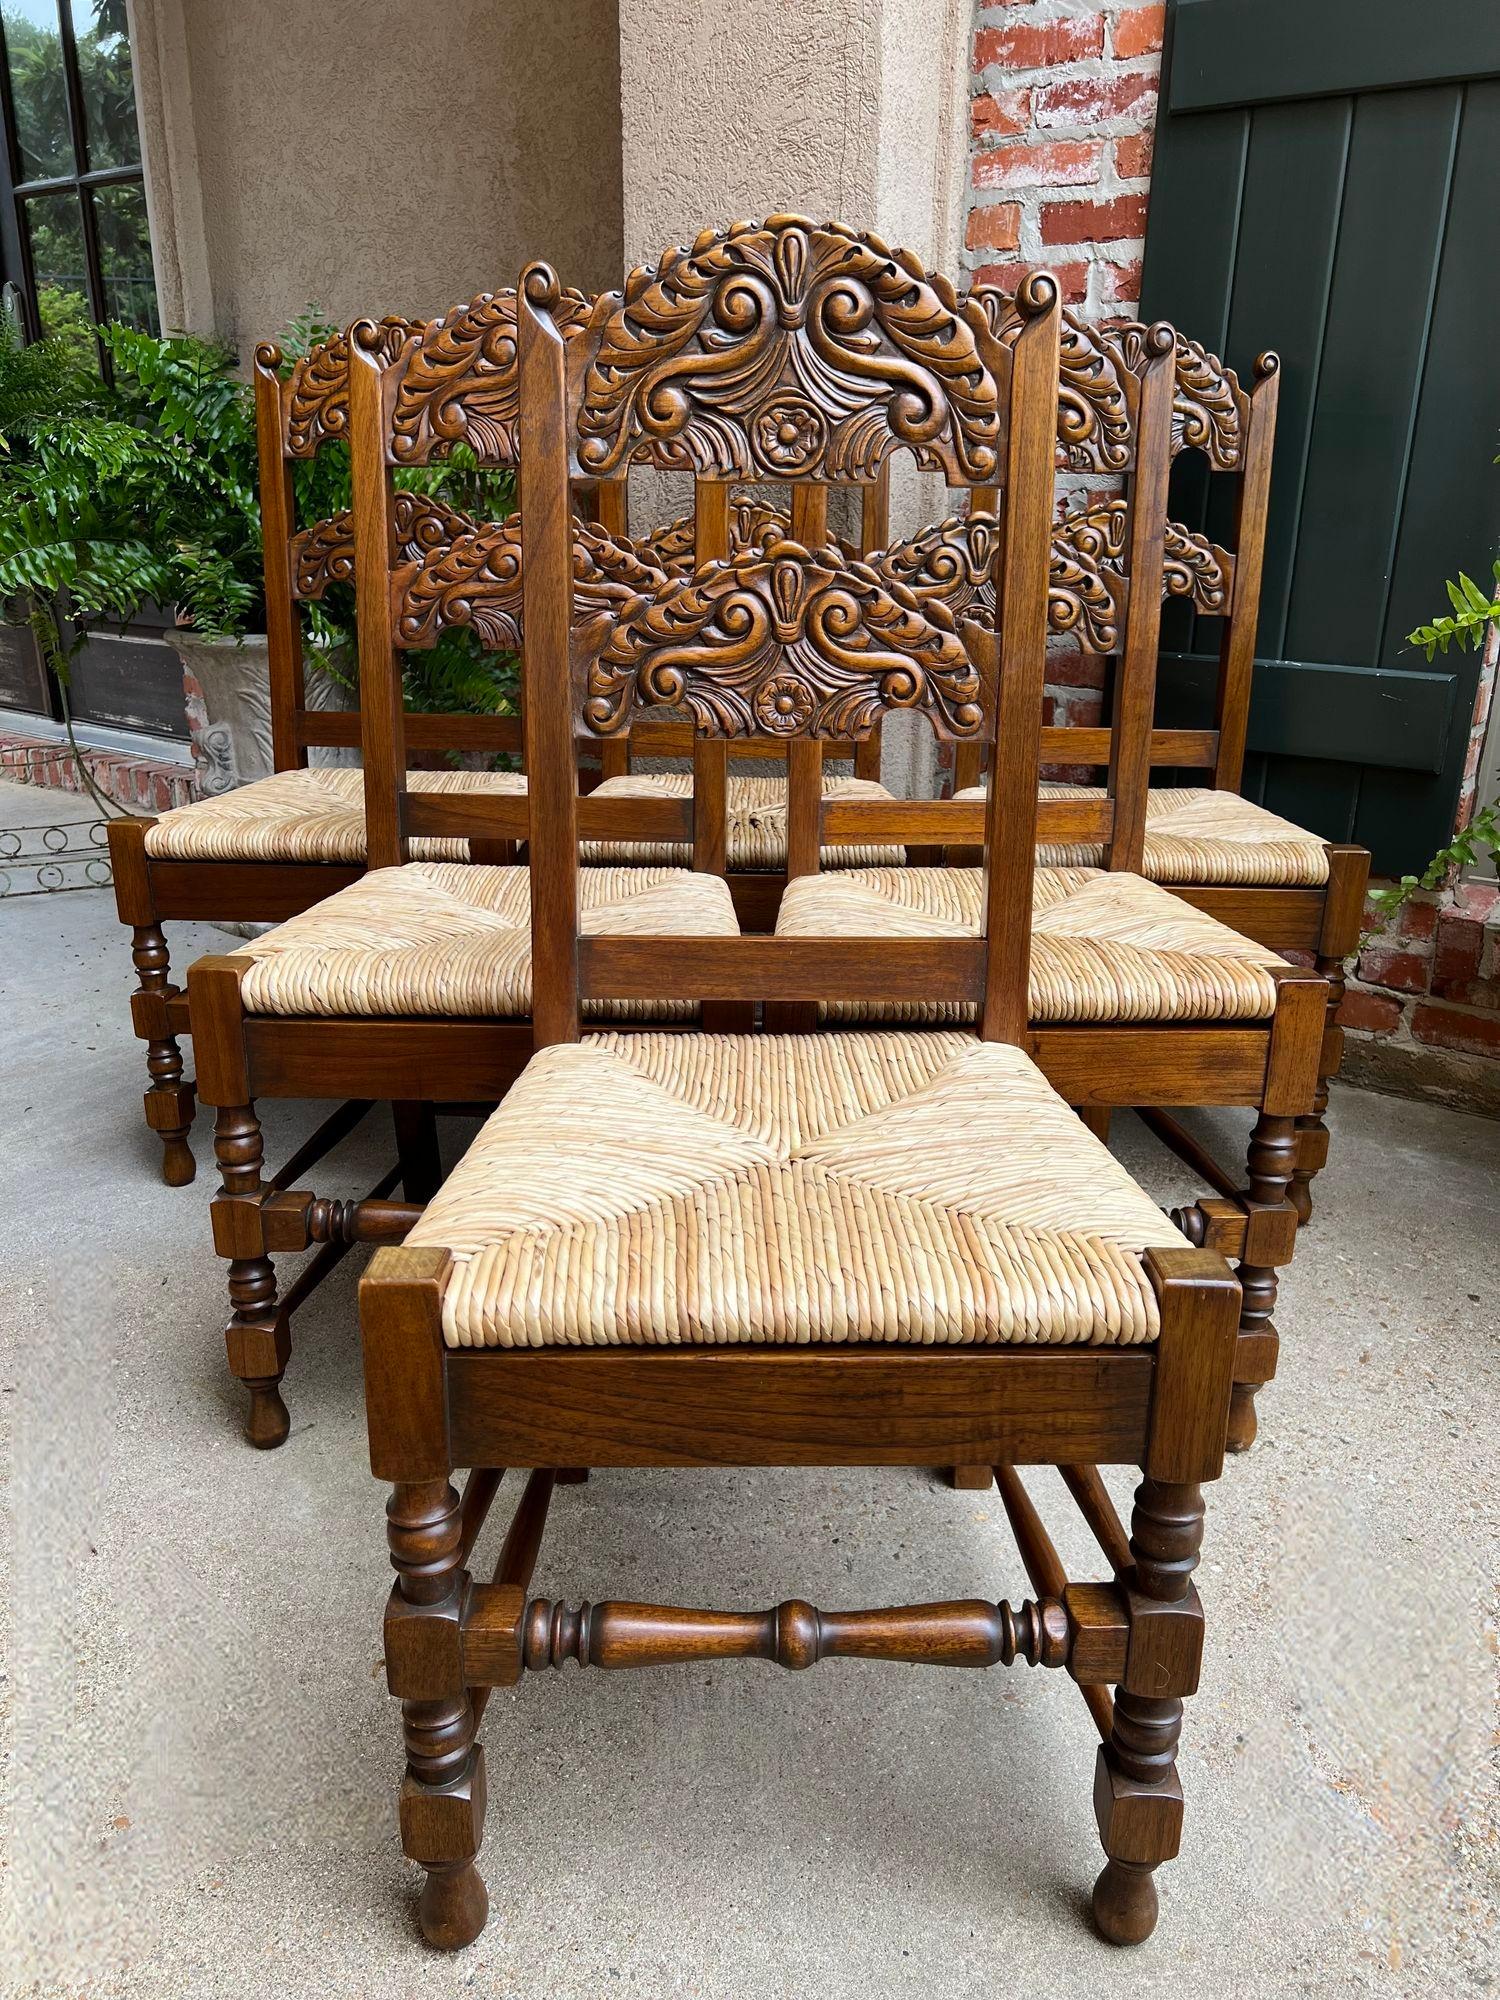 Set 6 Vintage English Dining Side Chairs Carved Oak Rush Seat Yorkshire Style.

Direct from England, a beautiful set of SIX vintage English dining chairs, with classic British style…perfect for a kitchen OR dining room!
With “Yorkshire” styling